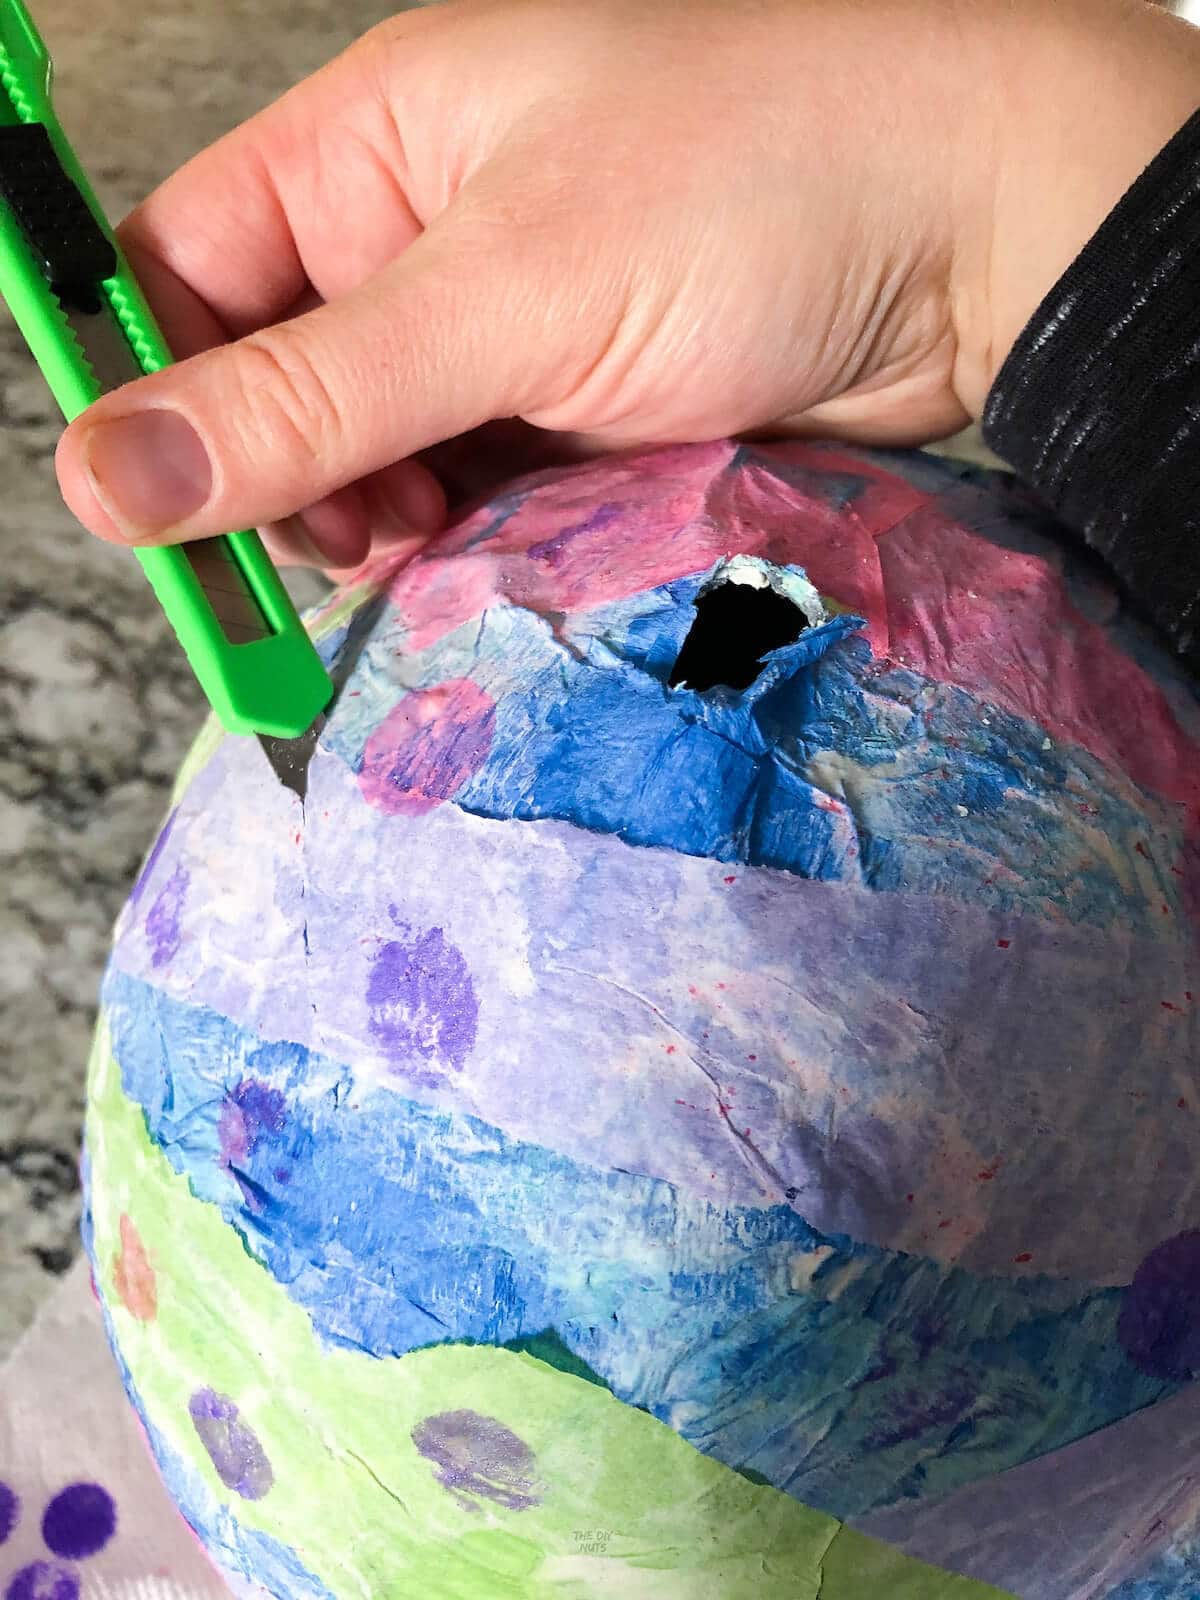 hand holding exacto knife cutting into paper mache piñata.